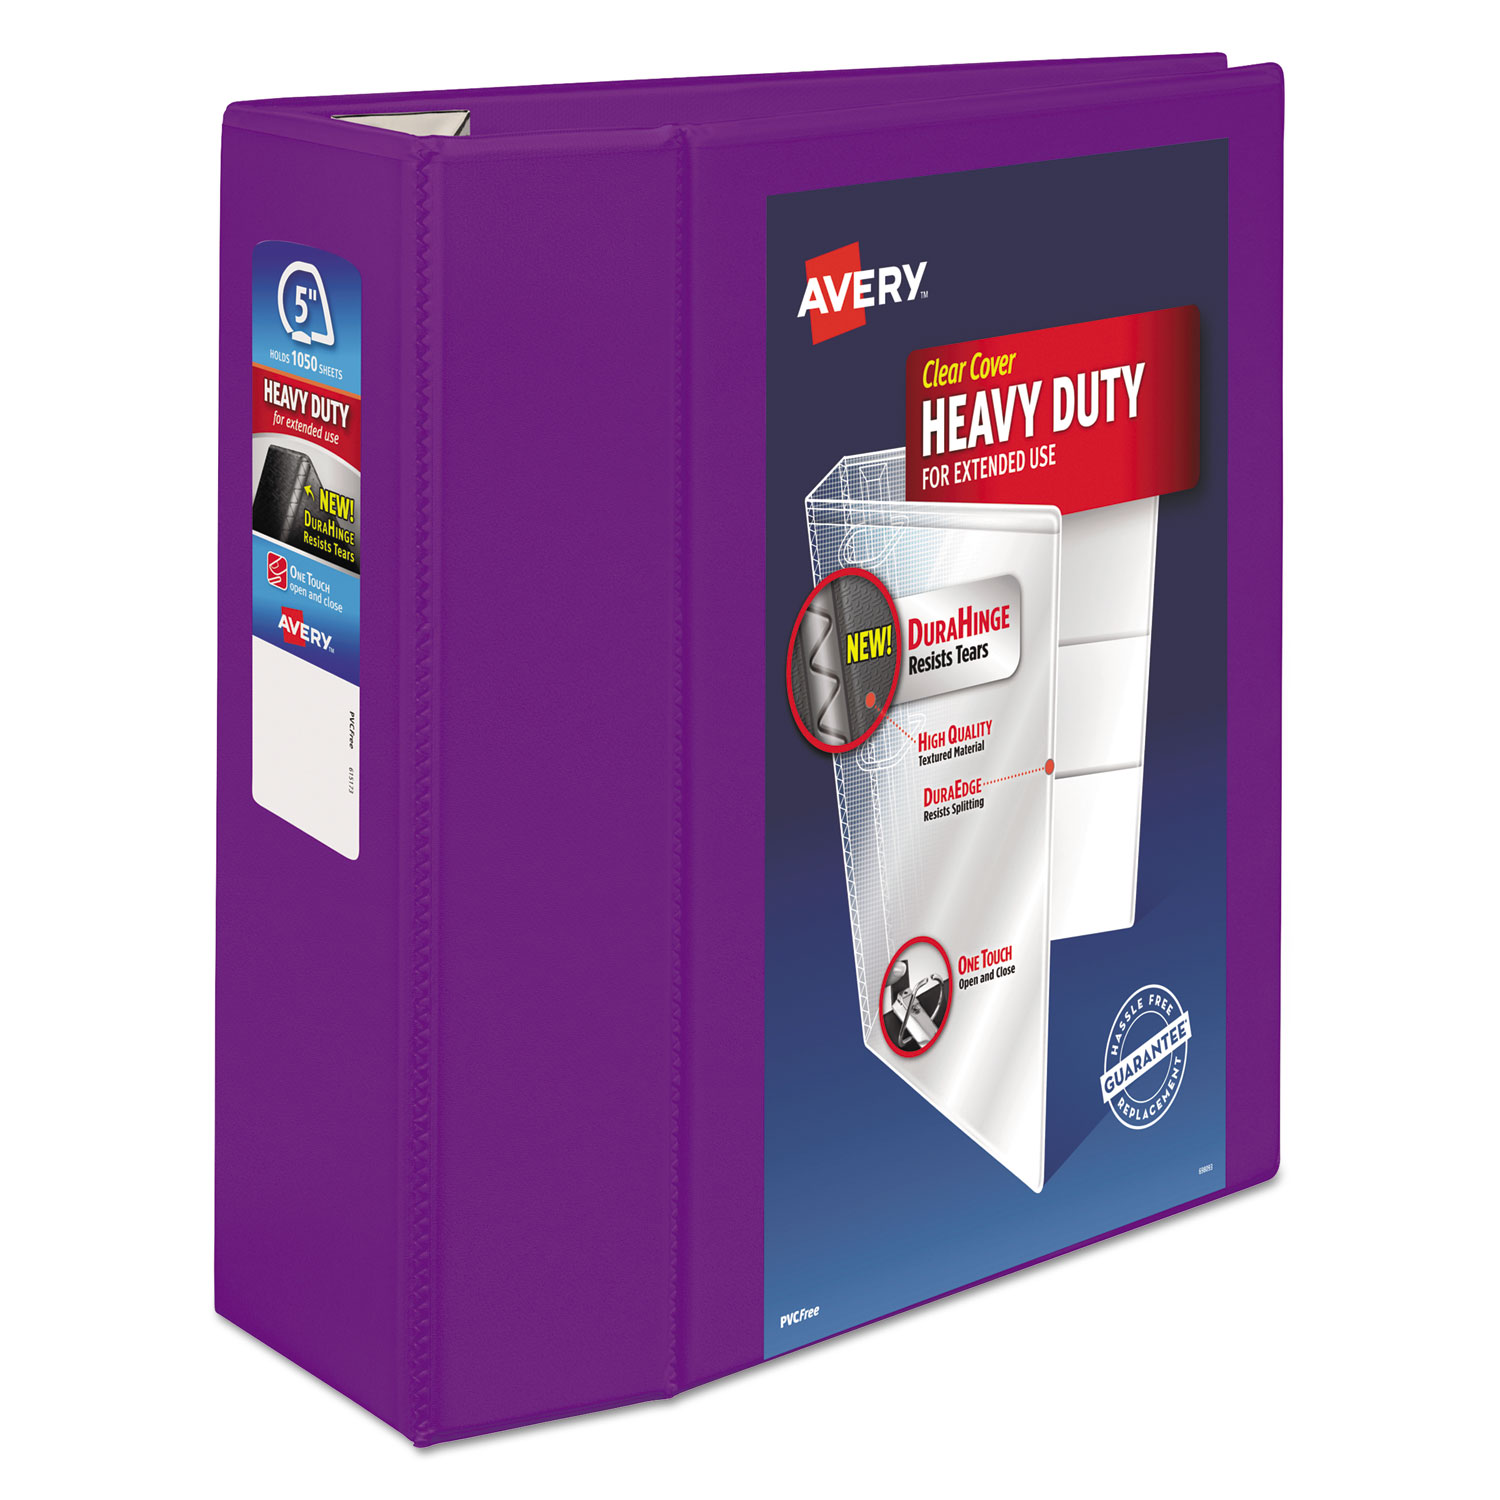  Avery 79816 Heavy-Duty View Binder with DuraHinge and Locking One Touch EZD Rings, 3 Rings, 5 Capacity, 11 x 8.5, Purple (AVE79816) 